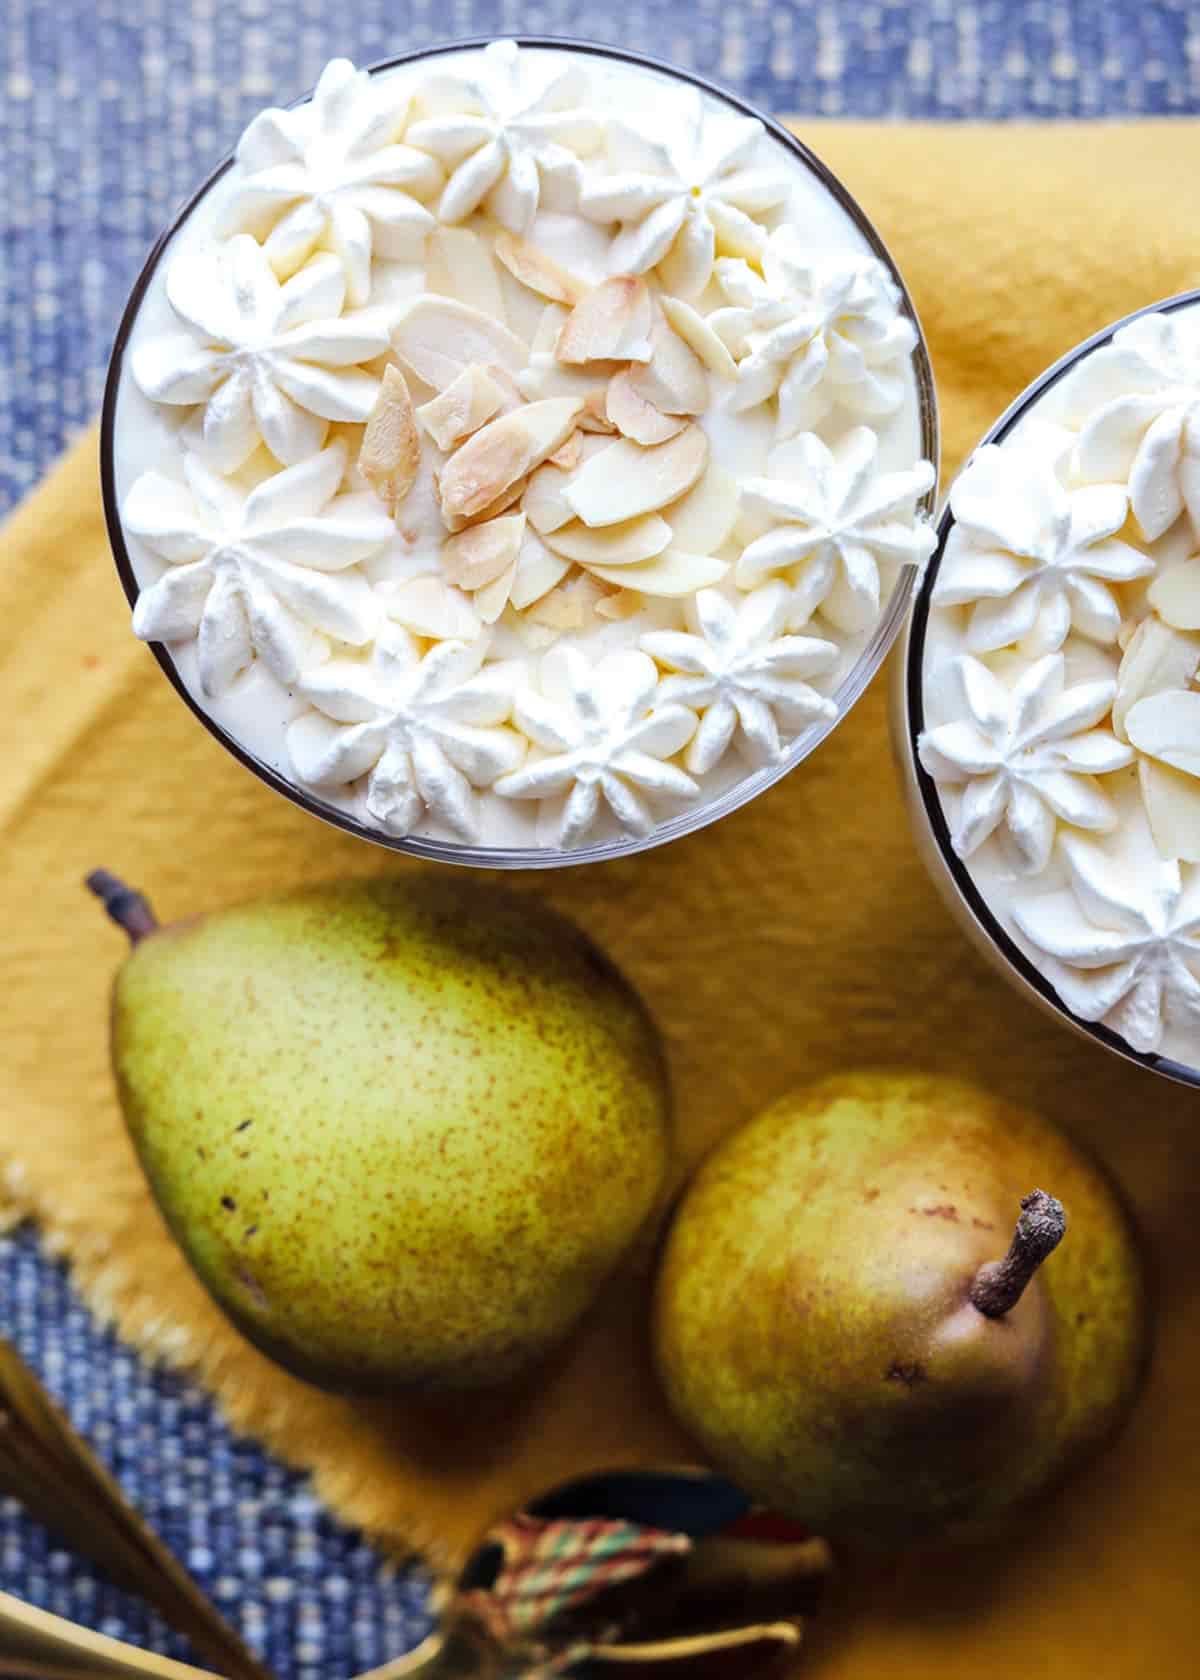 Jamaica Ginger Cake and Pear Trifle with pears